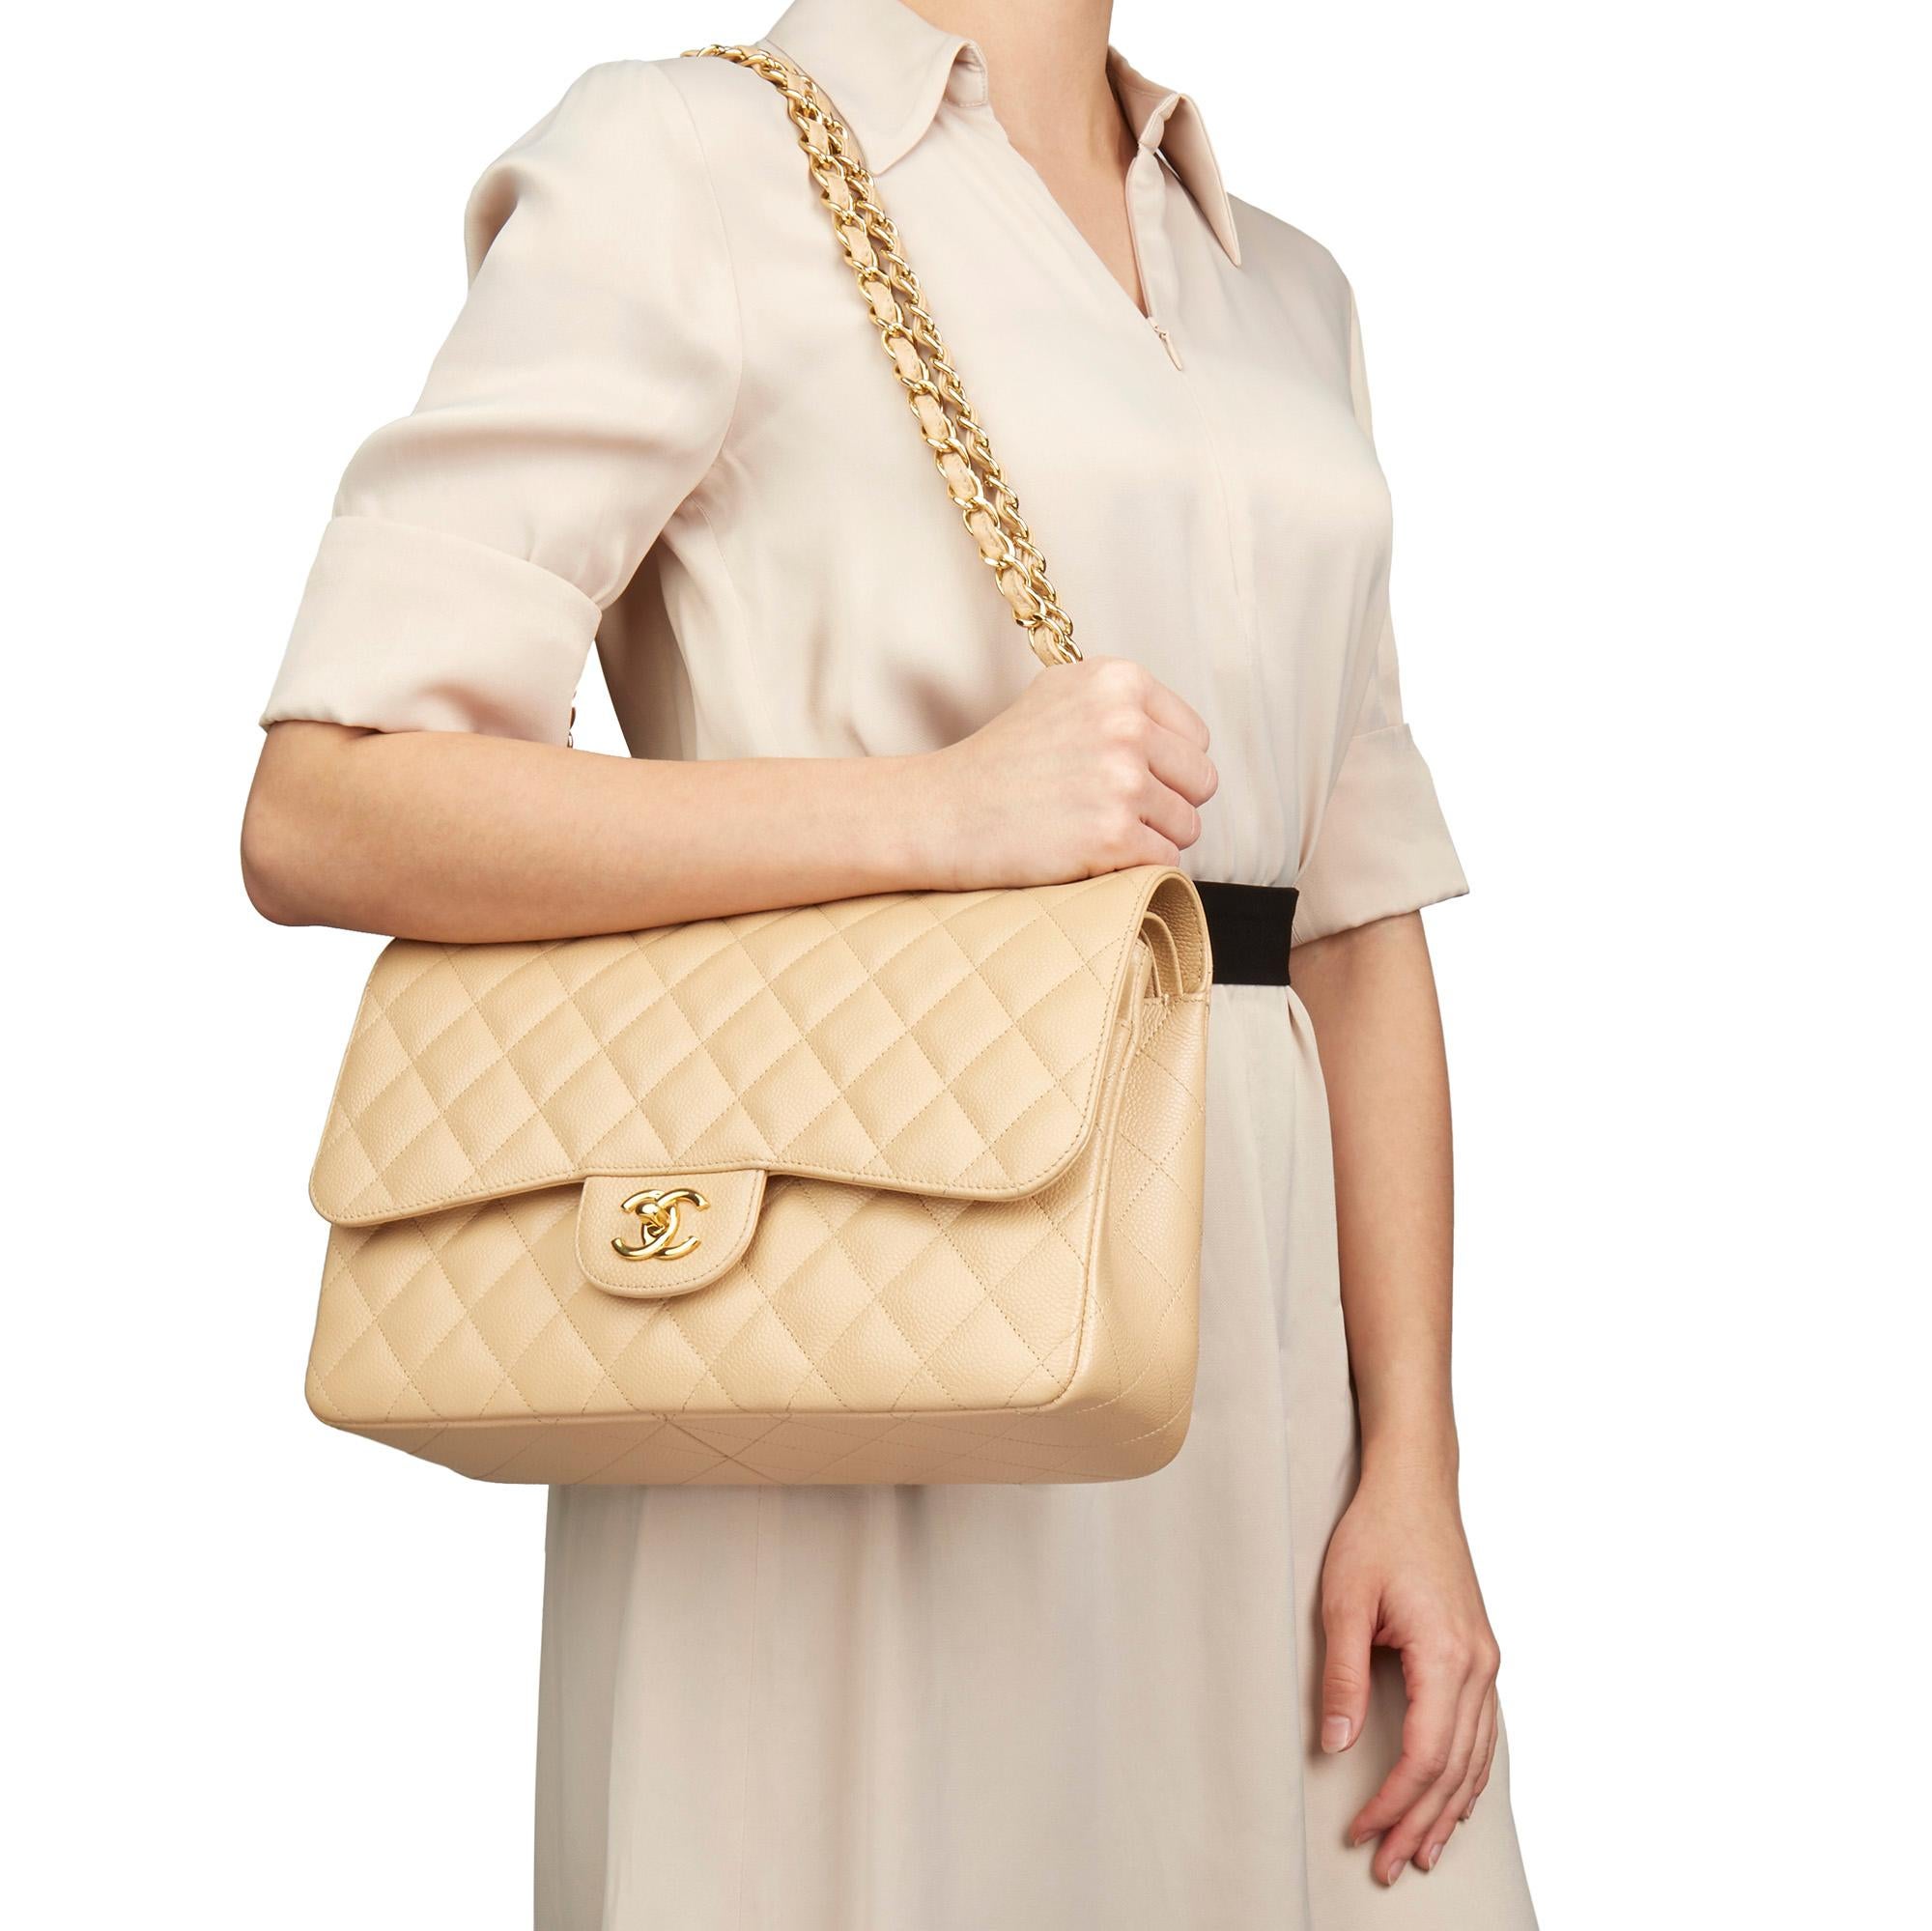 2013 Chanel Beige Quilted Caviar Leather Jumbo Classic Double Flap Bag 7